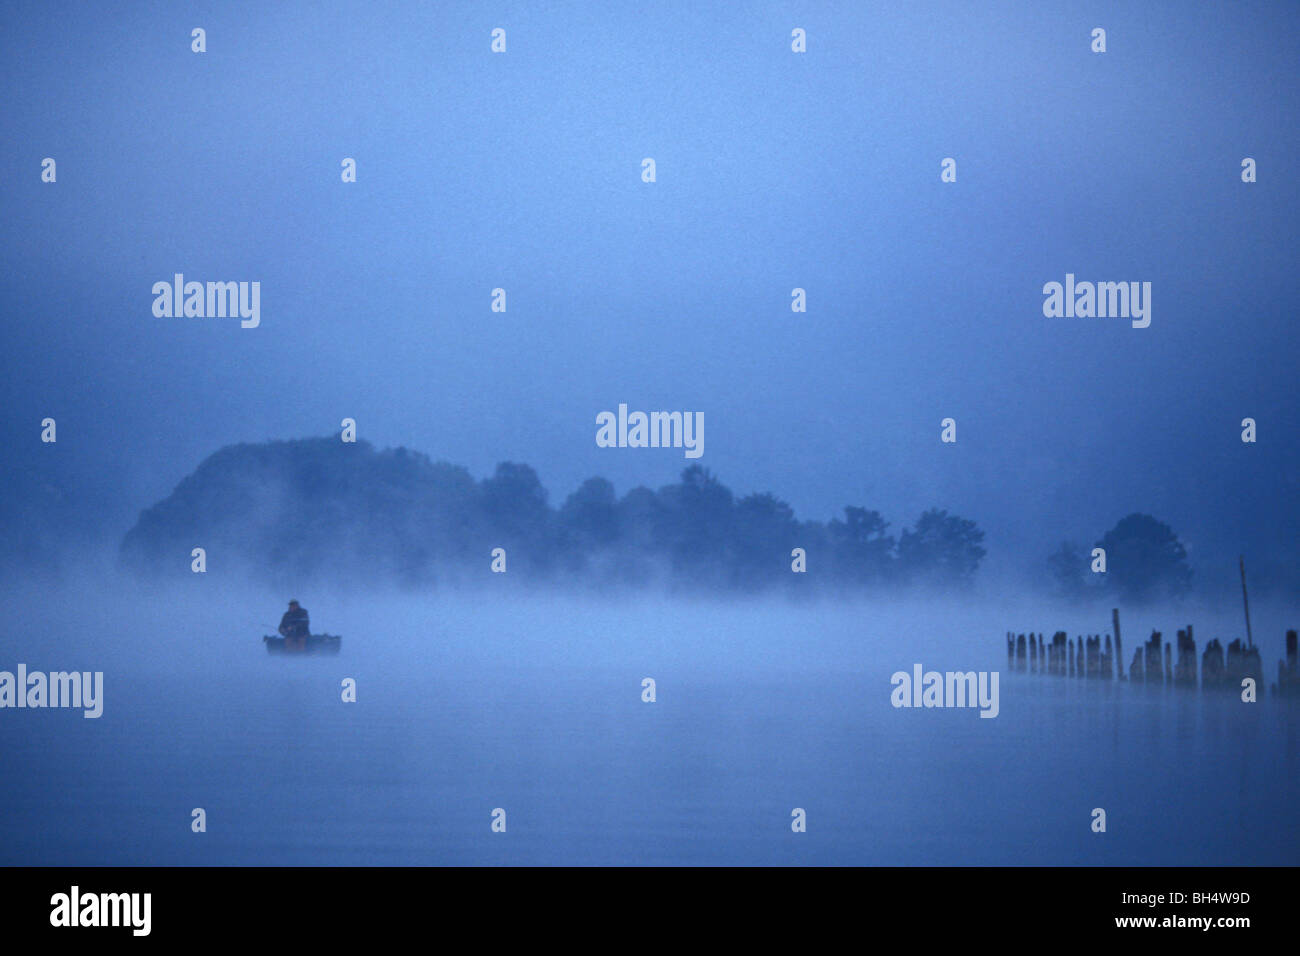 FISHERMAN IN THE MORNING MIST, AIGUEBELETTE LAKE, SAVOY (73), FRANCE Stock Photo